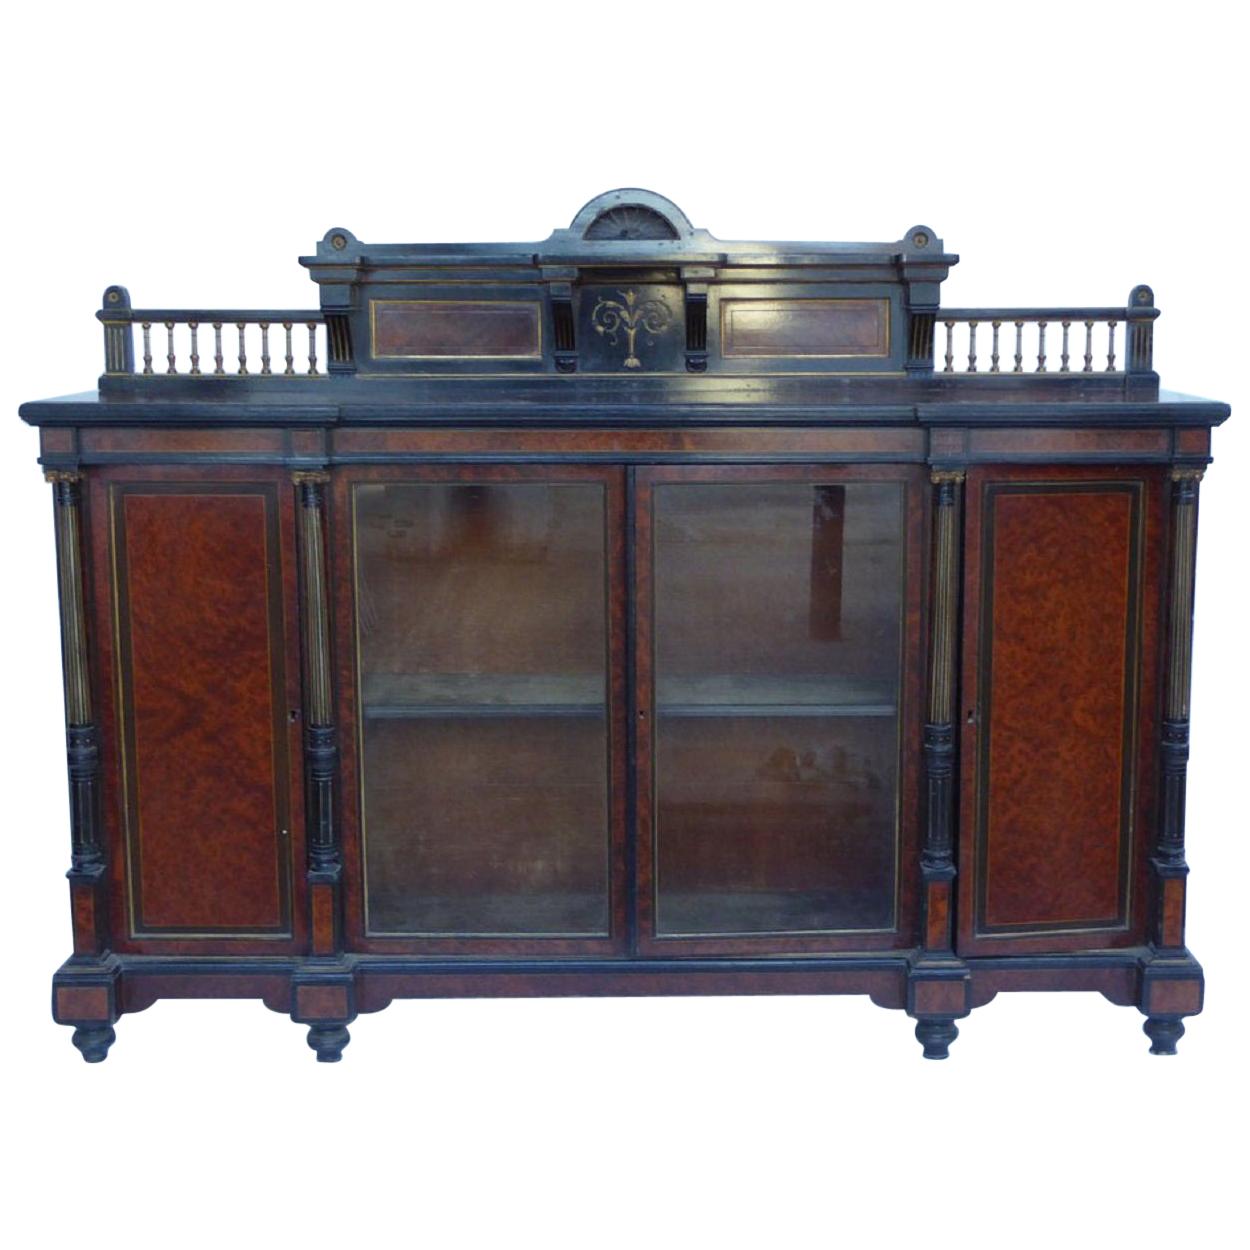 19th Century English Victorian Aesthetic Movement Credenza by Gillows